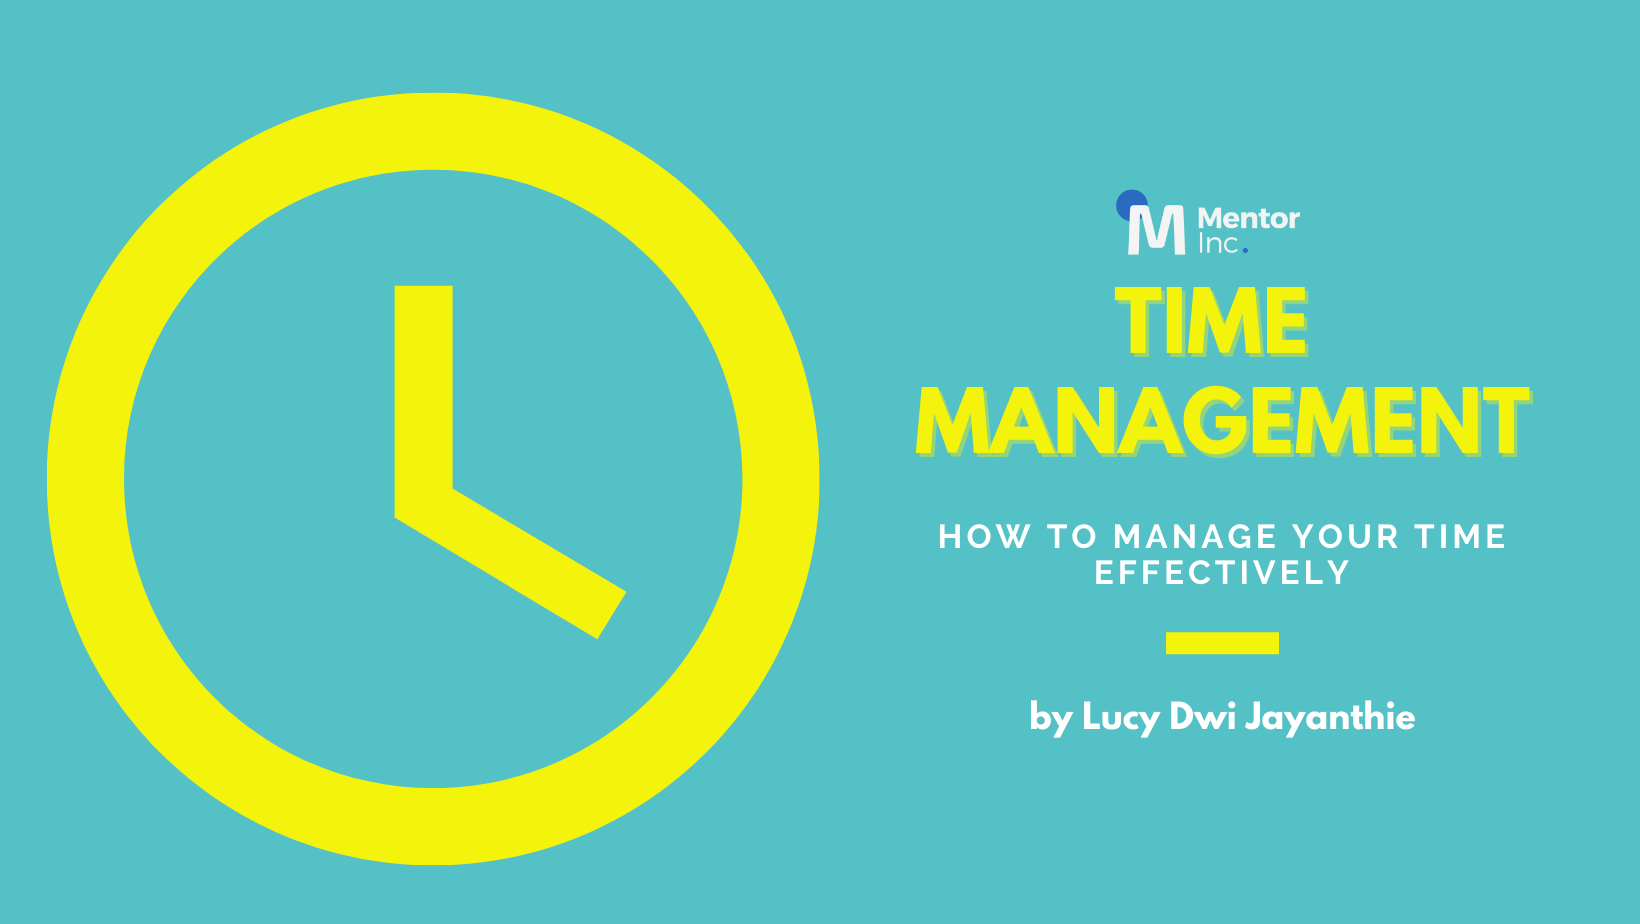 Time Management - How To Manage Your Time Effectively